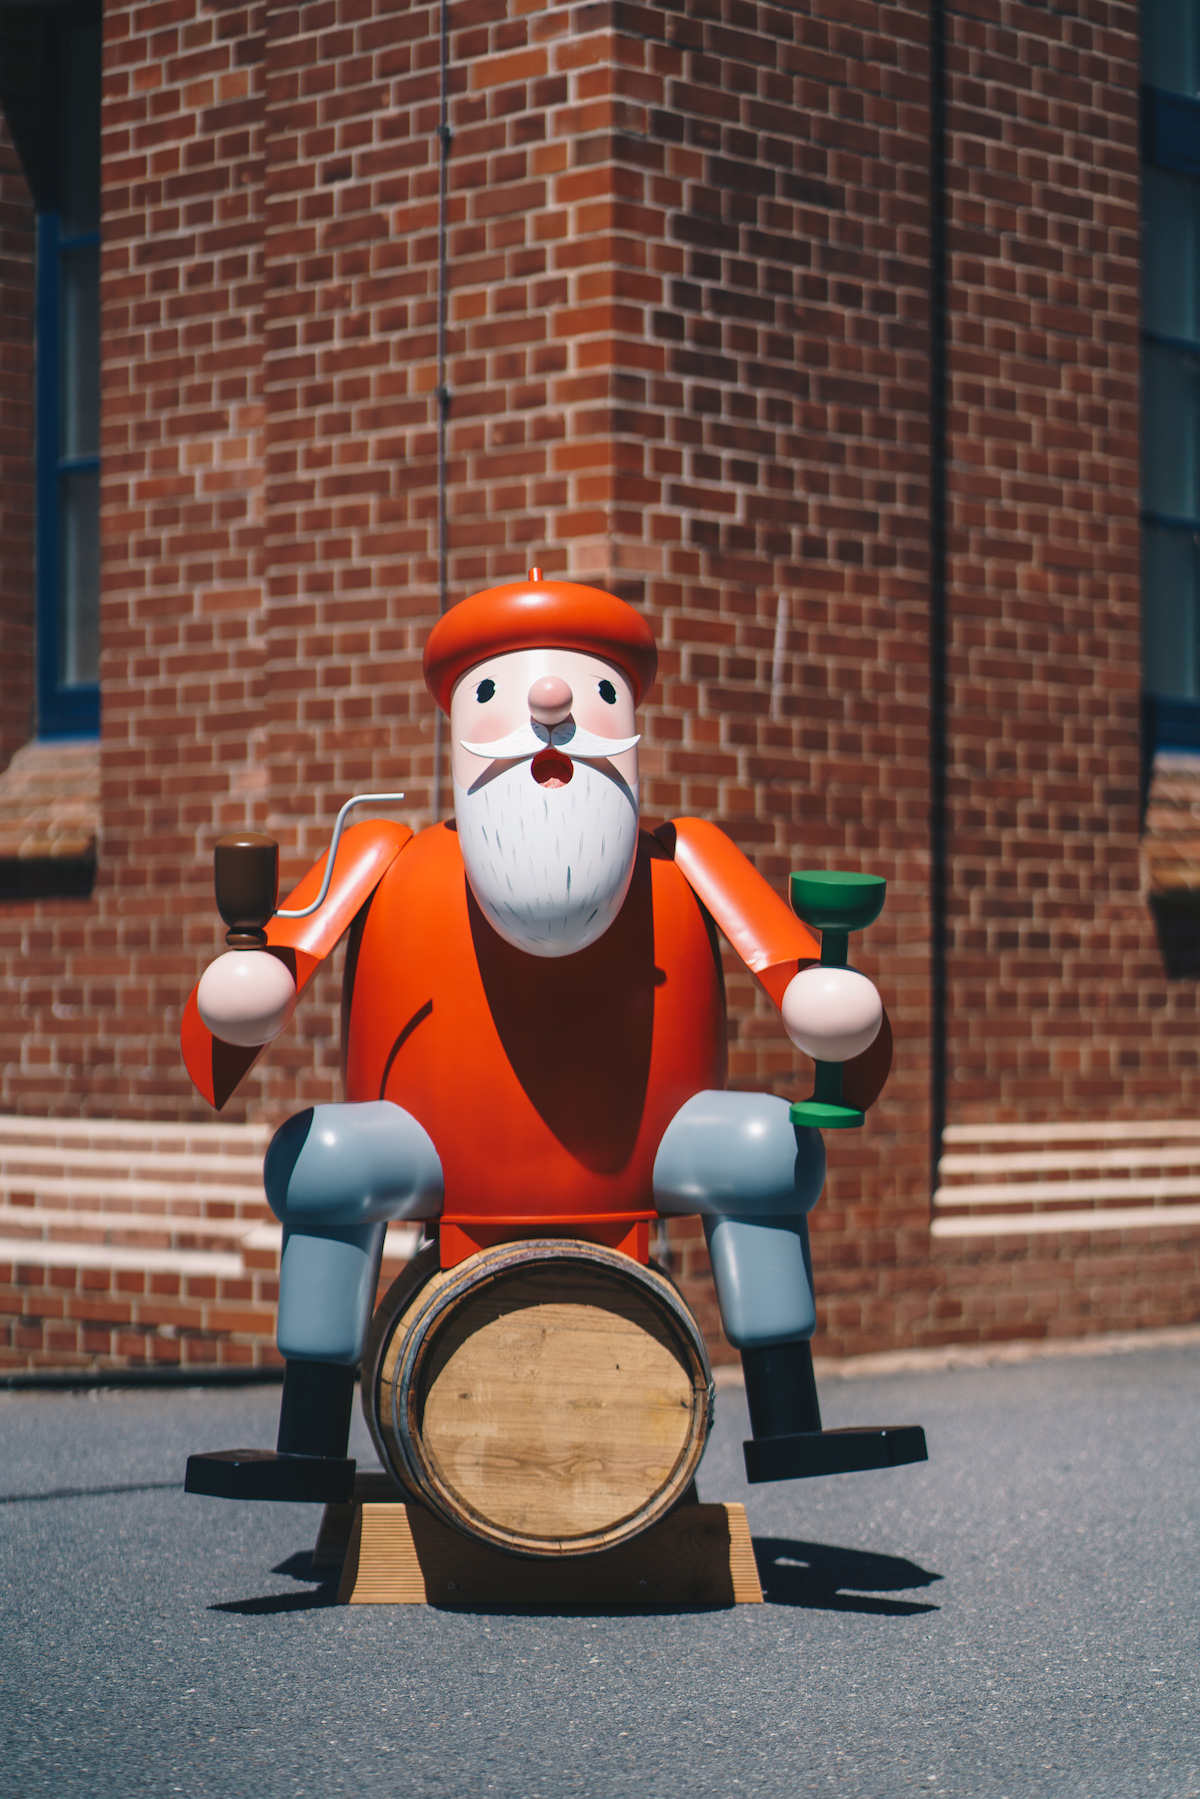 A red life-size wooden smoker sits on a wine barrel. This stands in front of a brick wall.